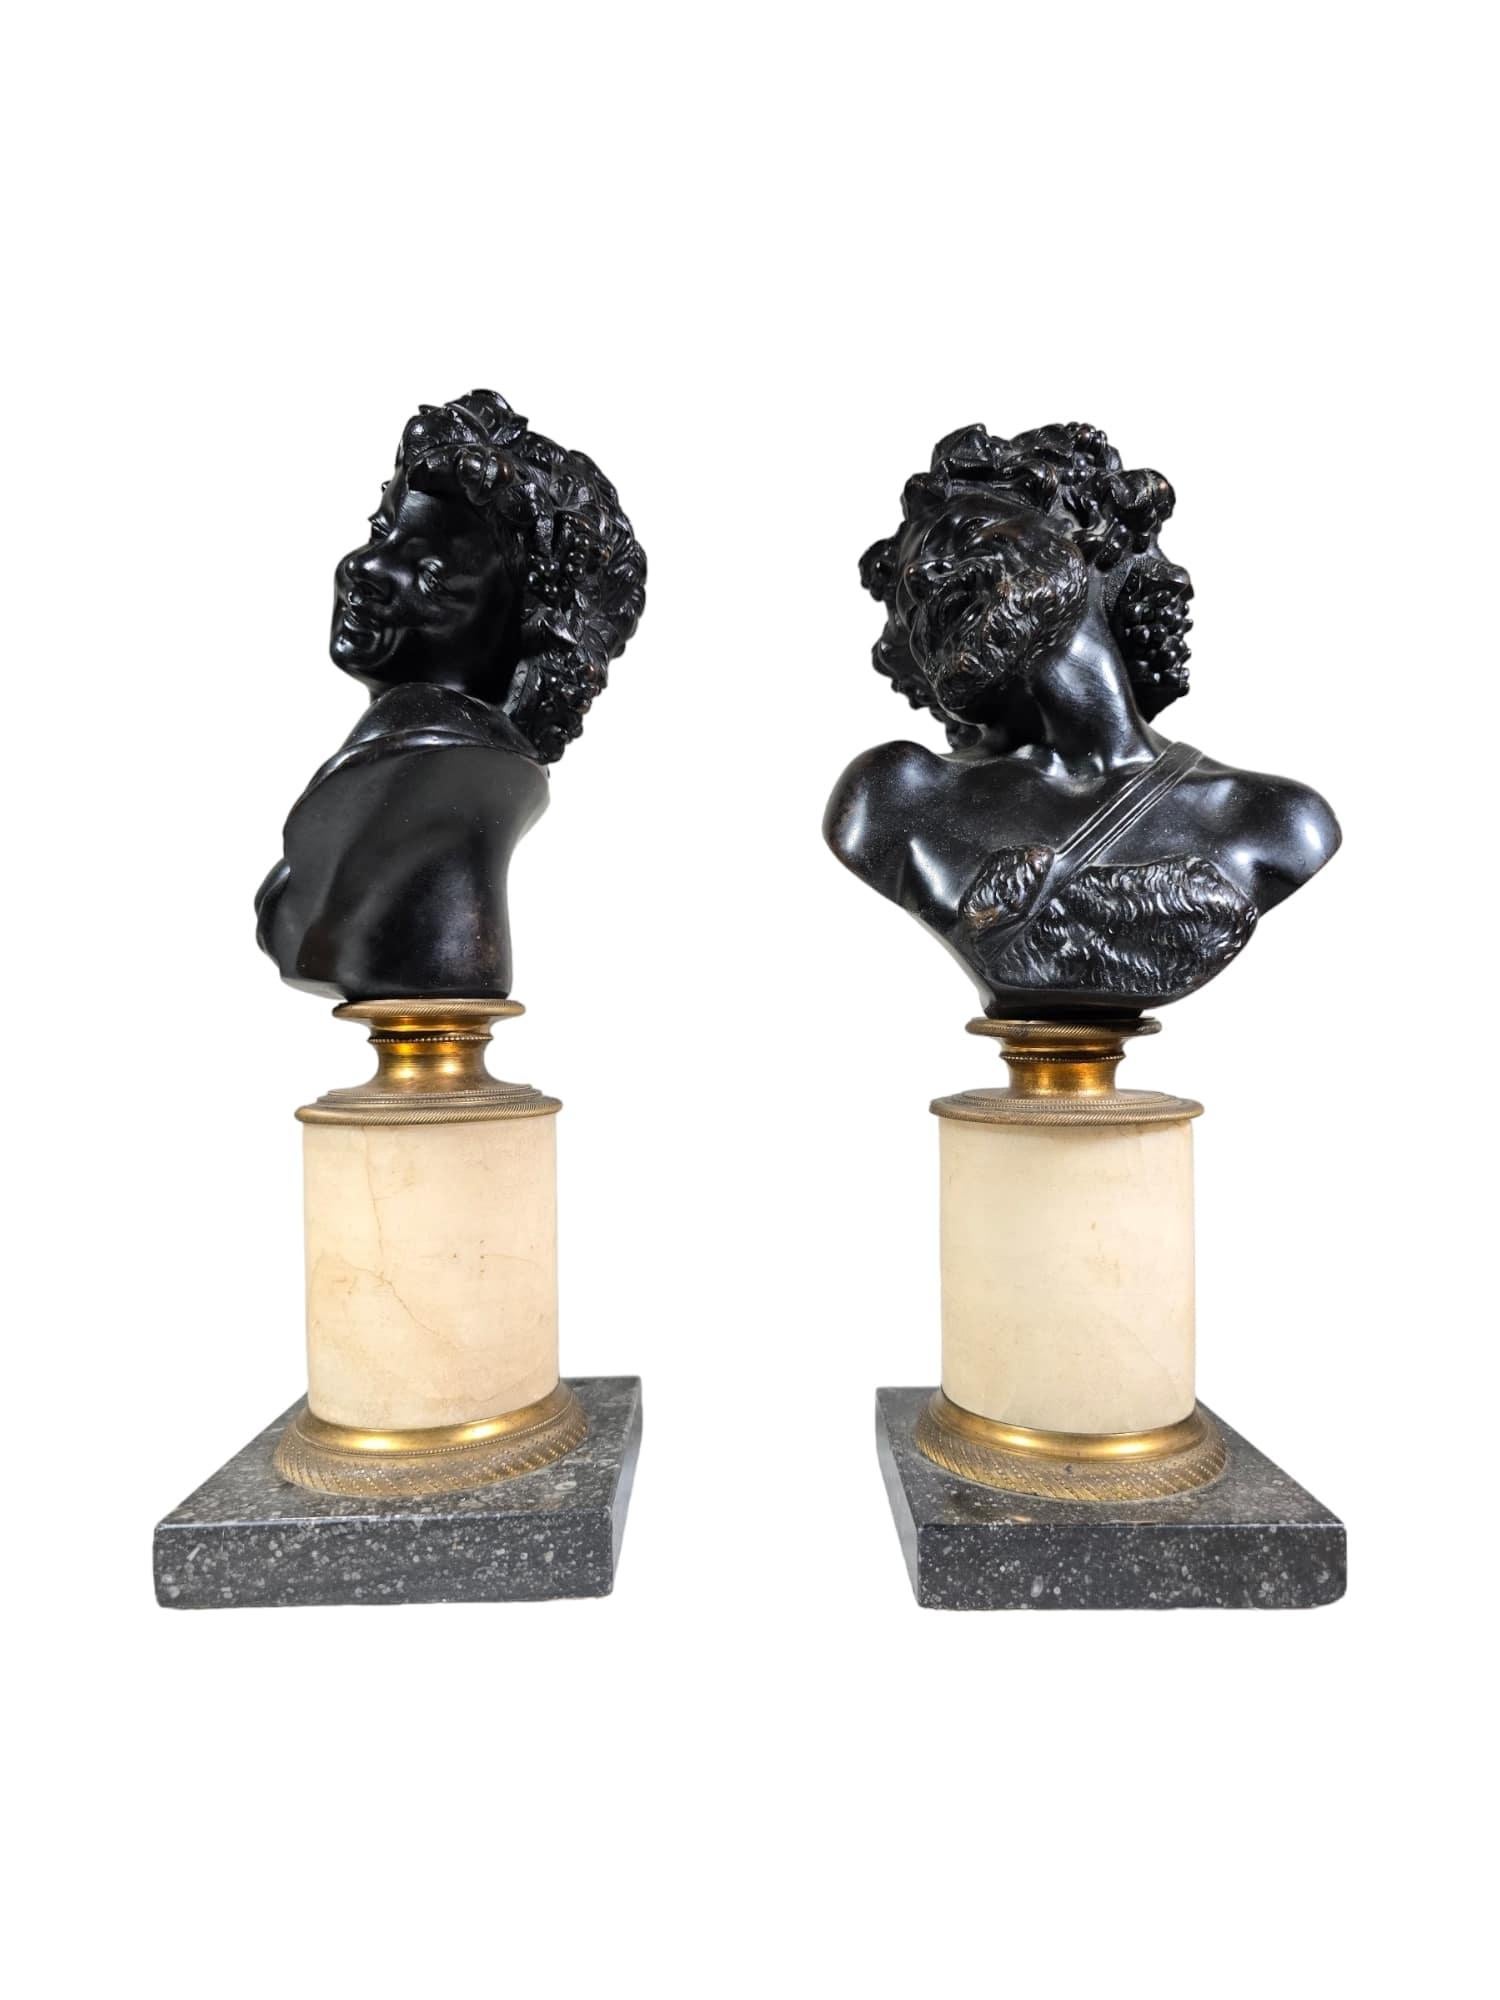 Antique Pair of Italian Bronze Busts: Dionysus and Ariadne, 19th Century For Sale 1